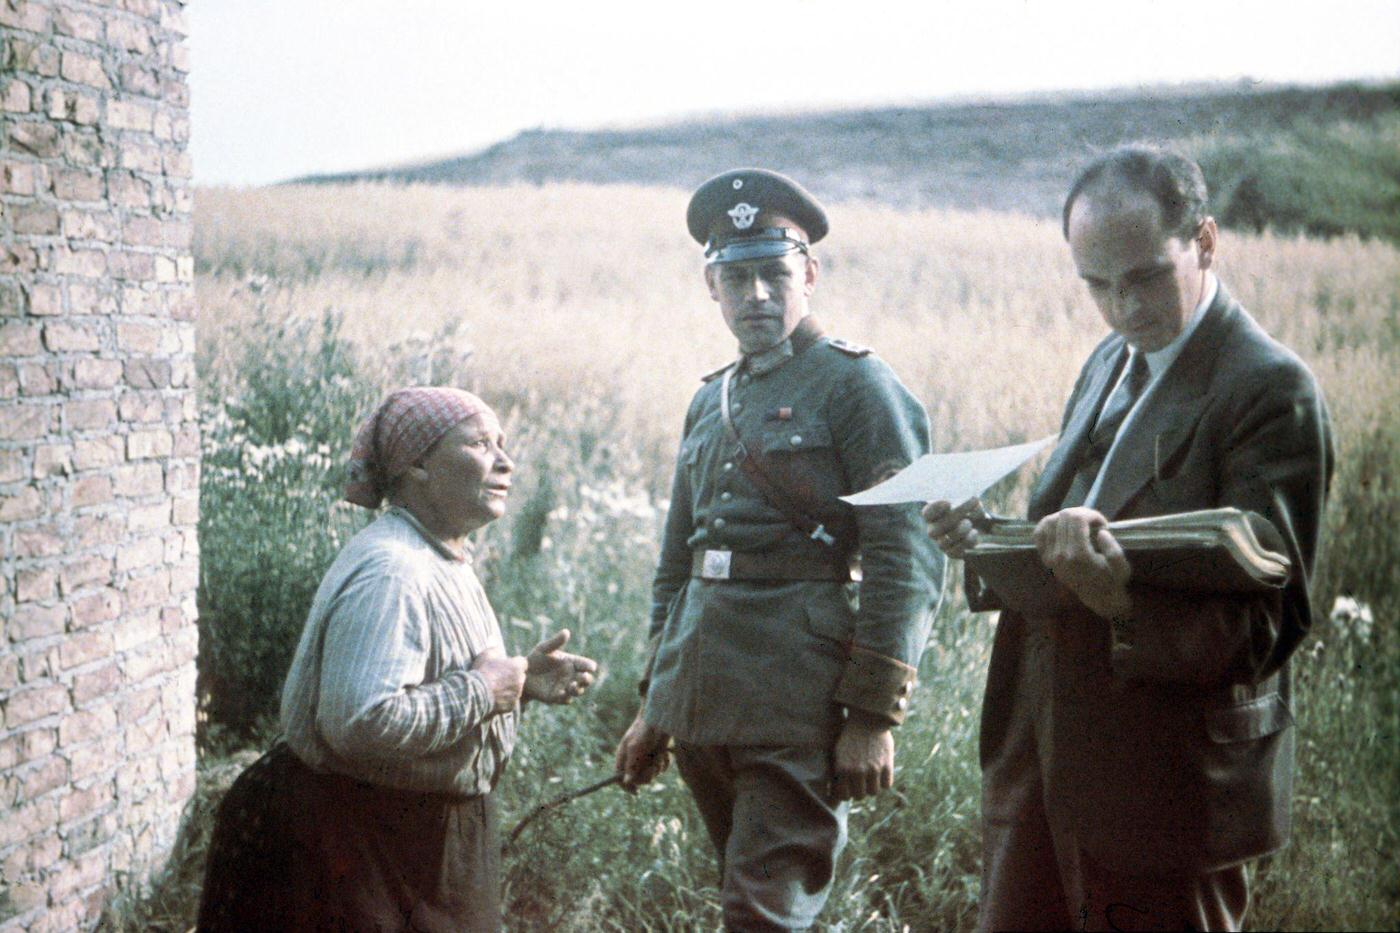 Dr. Robert Ritter, head of the Racial Hygiene Research Center, conducting an interview with an old woman during the Gypsy (Sinti and Roma) deportation in 1938.